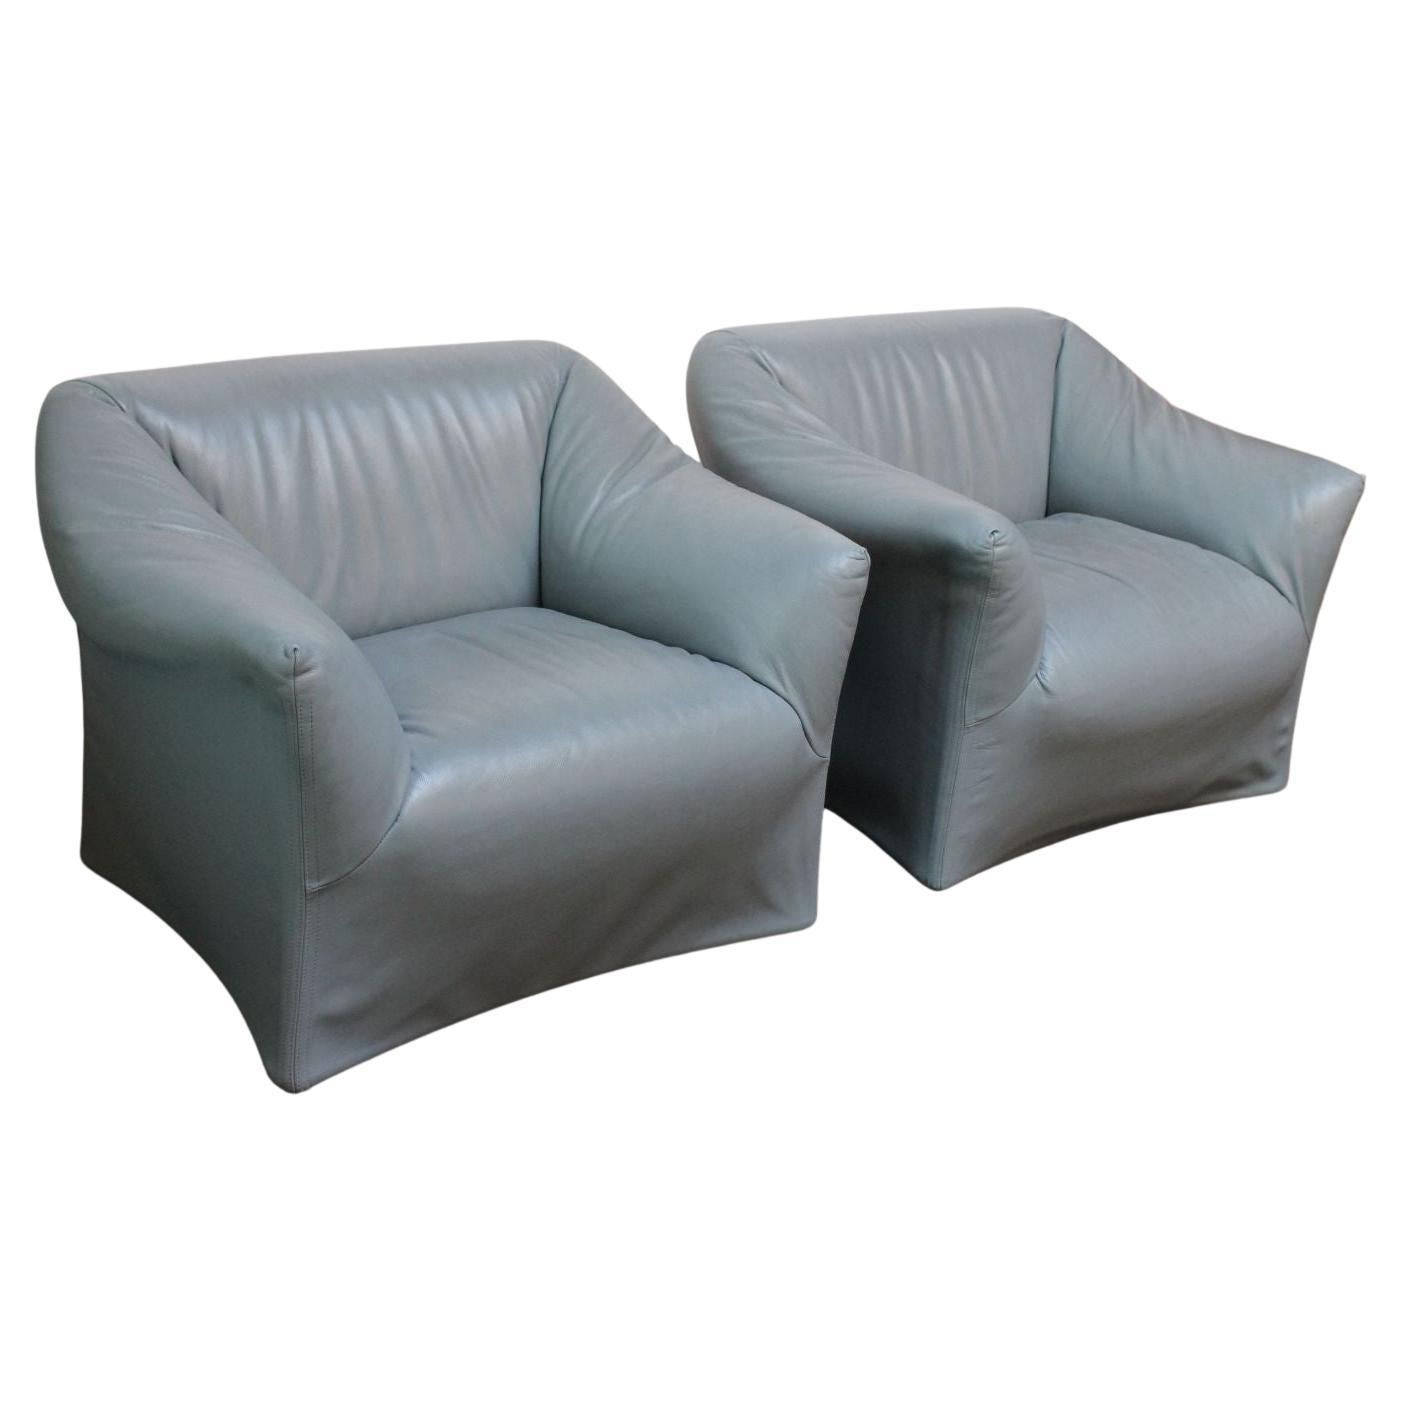 Pair of Italian Wide Leather Tentazione Club Chairs by Mario Bellini for Cassina